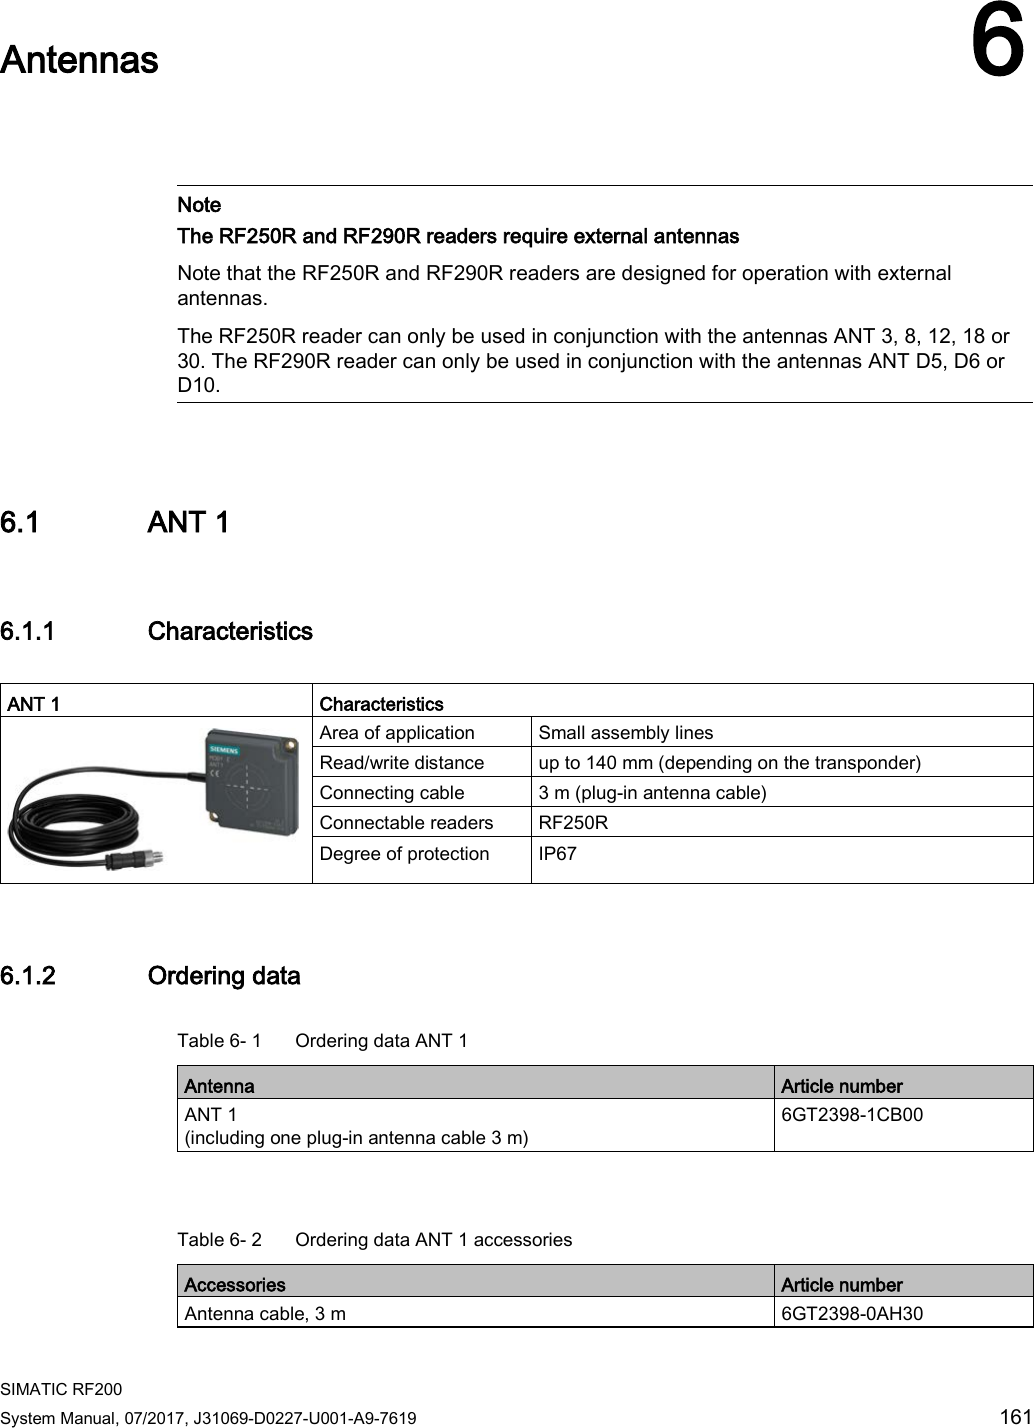  SIMATIC RF200 System Manual, 07/2017, J31069-D0227-U001-A9-7619 161  Antennas 6     Note The RF250R and RF290R readers require external antennas Note that the RF250R and RF290R readers are designed for operation with external antennas. The RF250R reader can only be used in conjunction with the antennas ANT 3, 8, 12, 18 or 30. The RF290R reader can only be used in conjunction with the antennas ANT D5, D6 or D10.  6.1 ANT 1 6.1.1 Characteristics  ANT 1  Characteristics  Area of application Small assembly lines Read/write distance up to 140 mm (depending on the transponder) Connecting cable 3 m (plug-in antenna cable) Connectable readers RF250R Degree of protection  IP67 6.1.2 Ordering data Table 6- 1  Ordering data ANT 1 Antenna Article number ANT 1 (including one plug-in antenna cable 3 m) 6GT2398-1CB00  Table 6- 2  Ordering data ANT 1 accessories Accessories Article number Antenna cable, 3 m 6GT2398-0AH30 